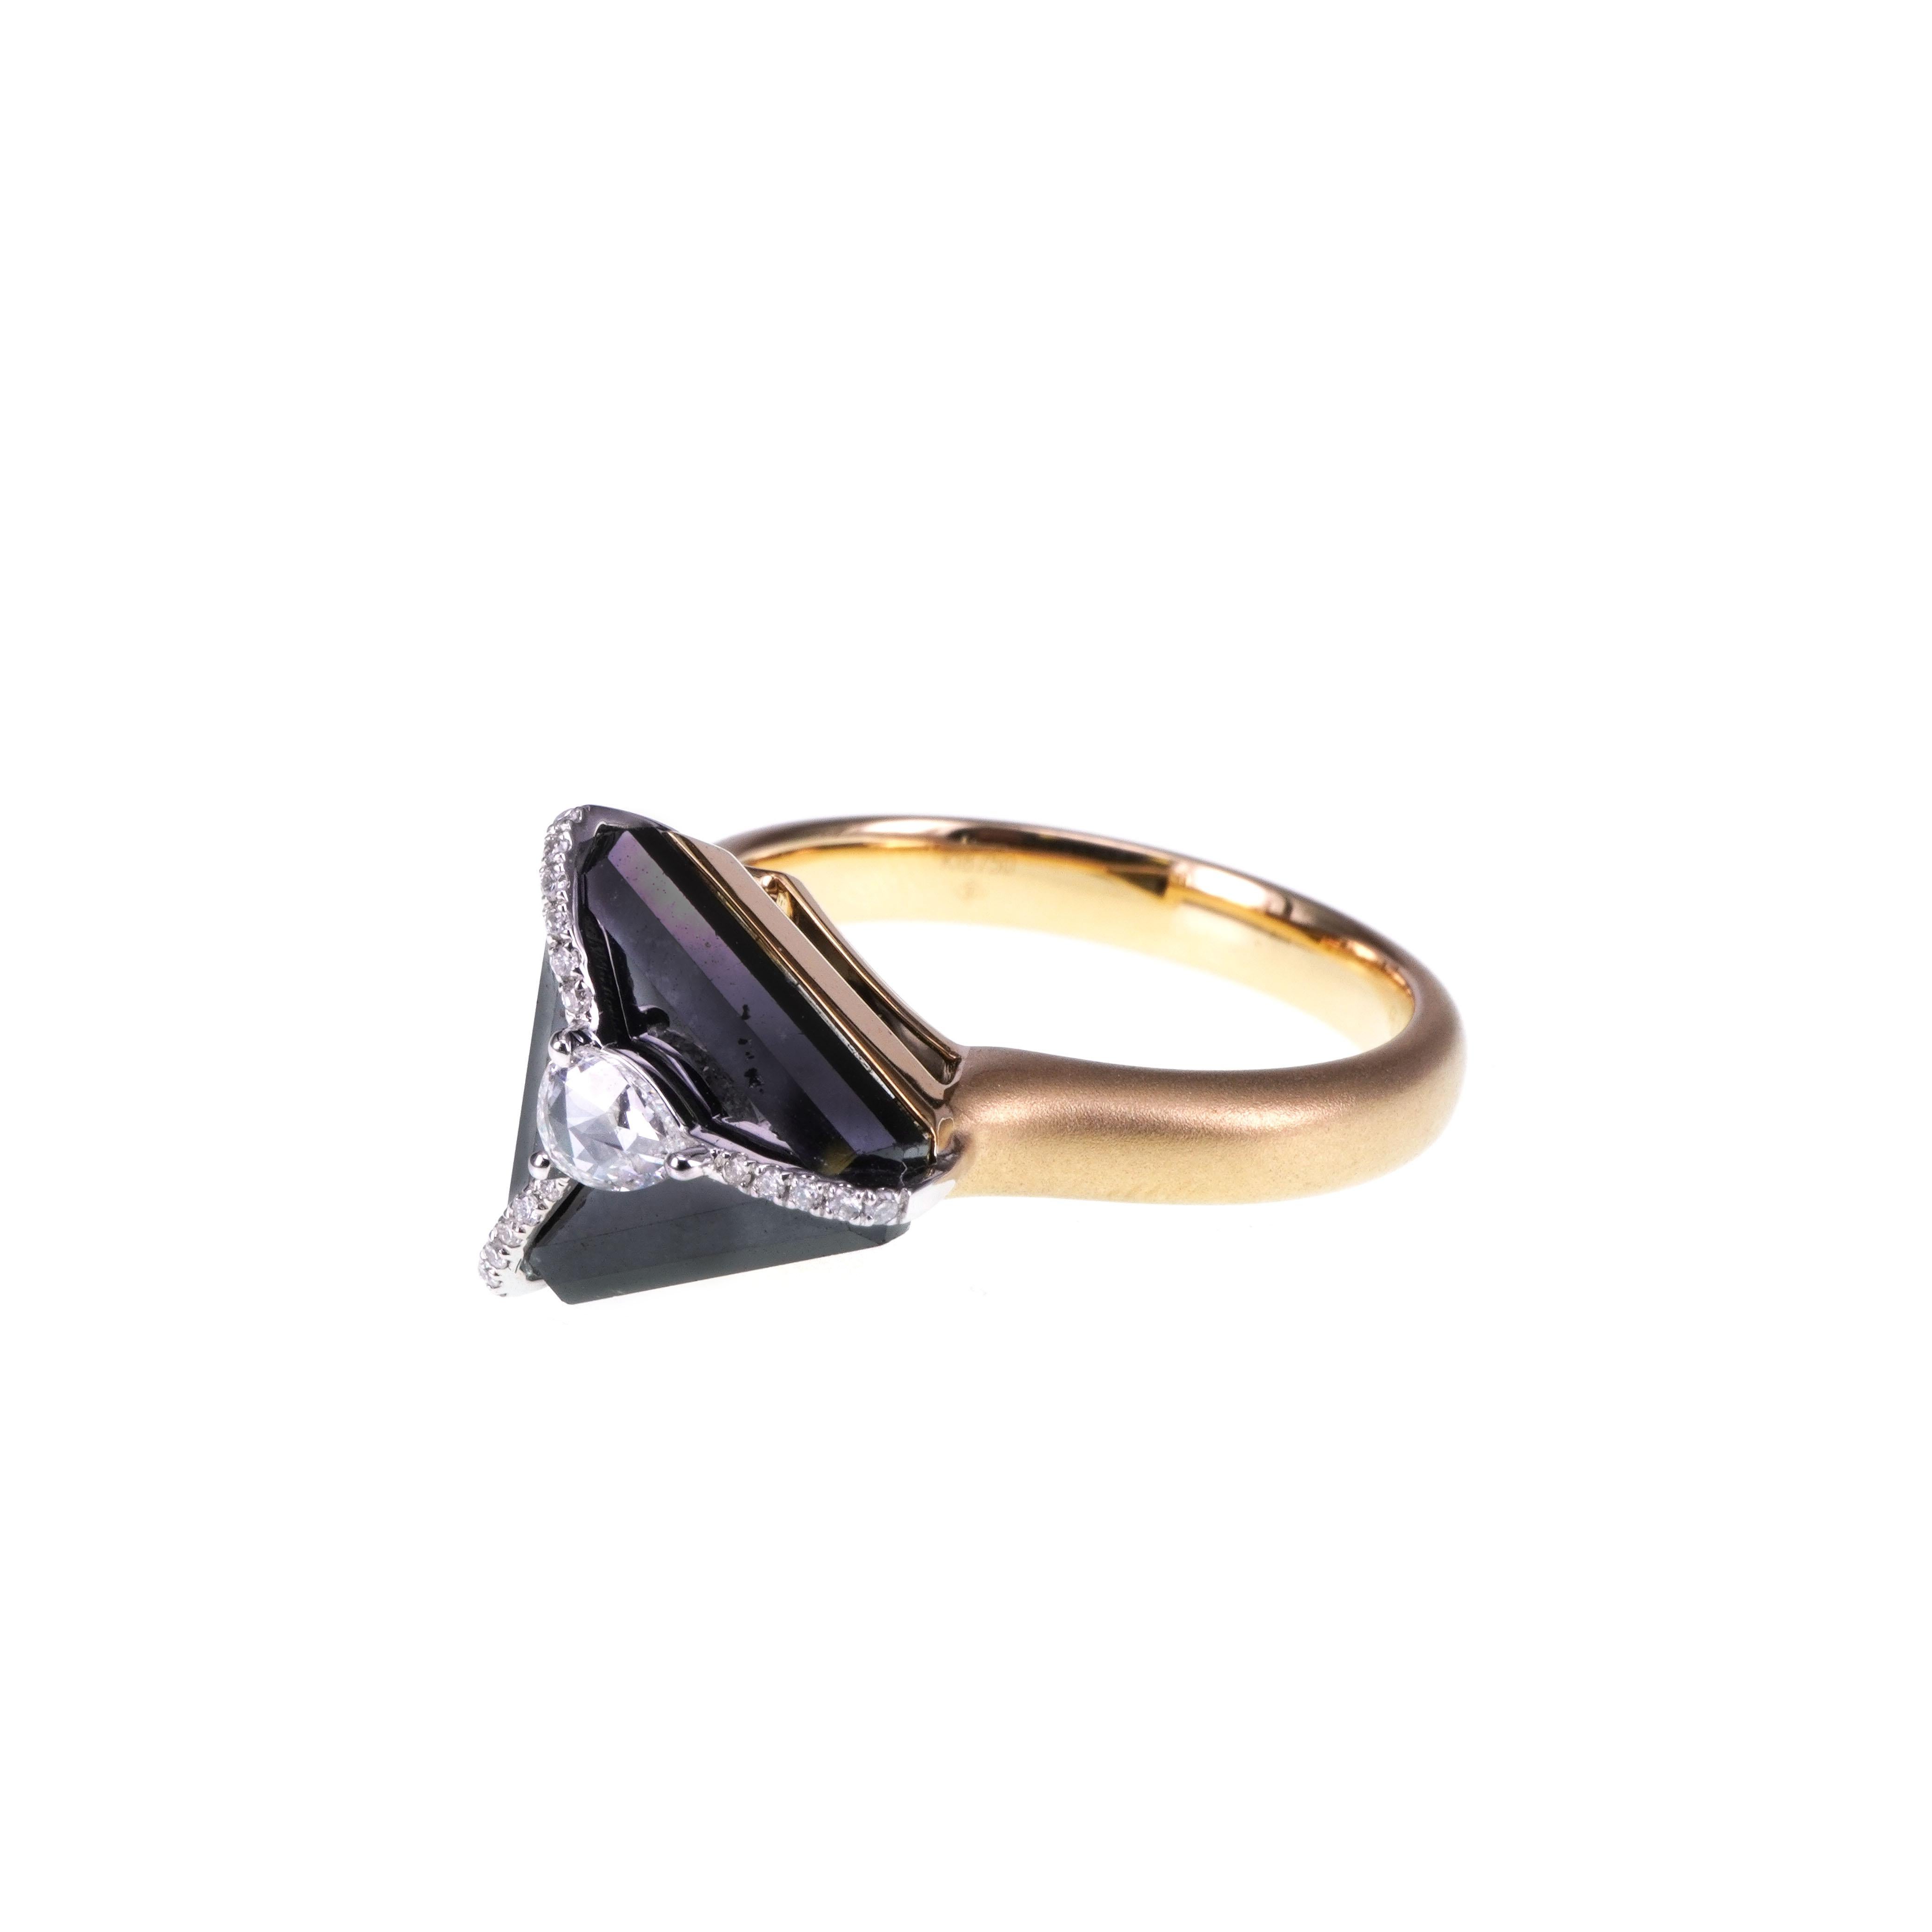 A highly saturated black diamond weighing 5.28 carats are set with 0.17 carat of white diamond in this matt finished Italian make 18 K Gold Ring.
The USP of this ring is that the way the diamond is set on the black diamond shows the highest level of